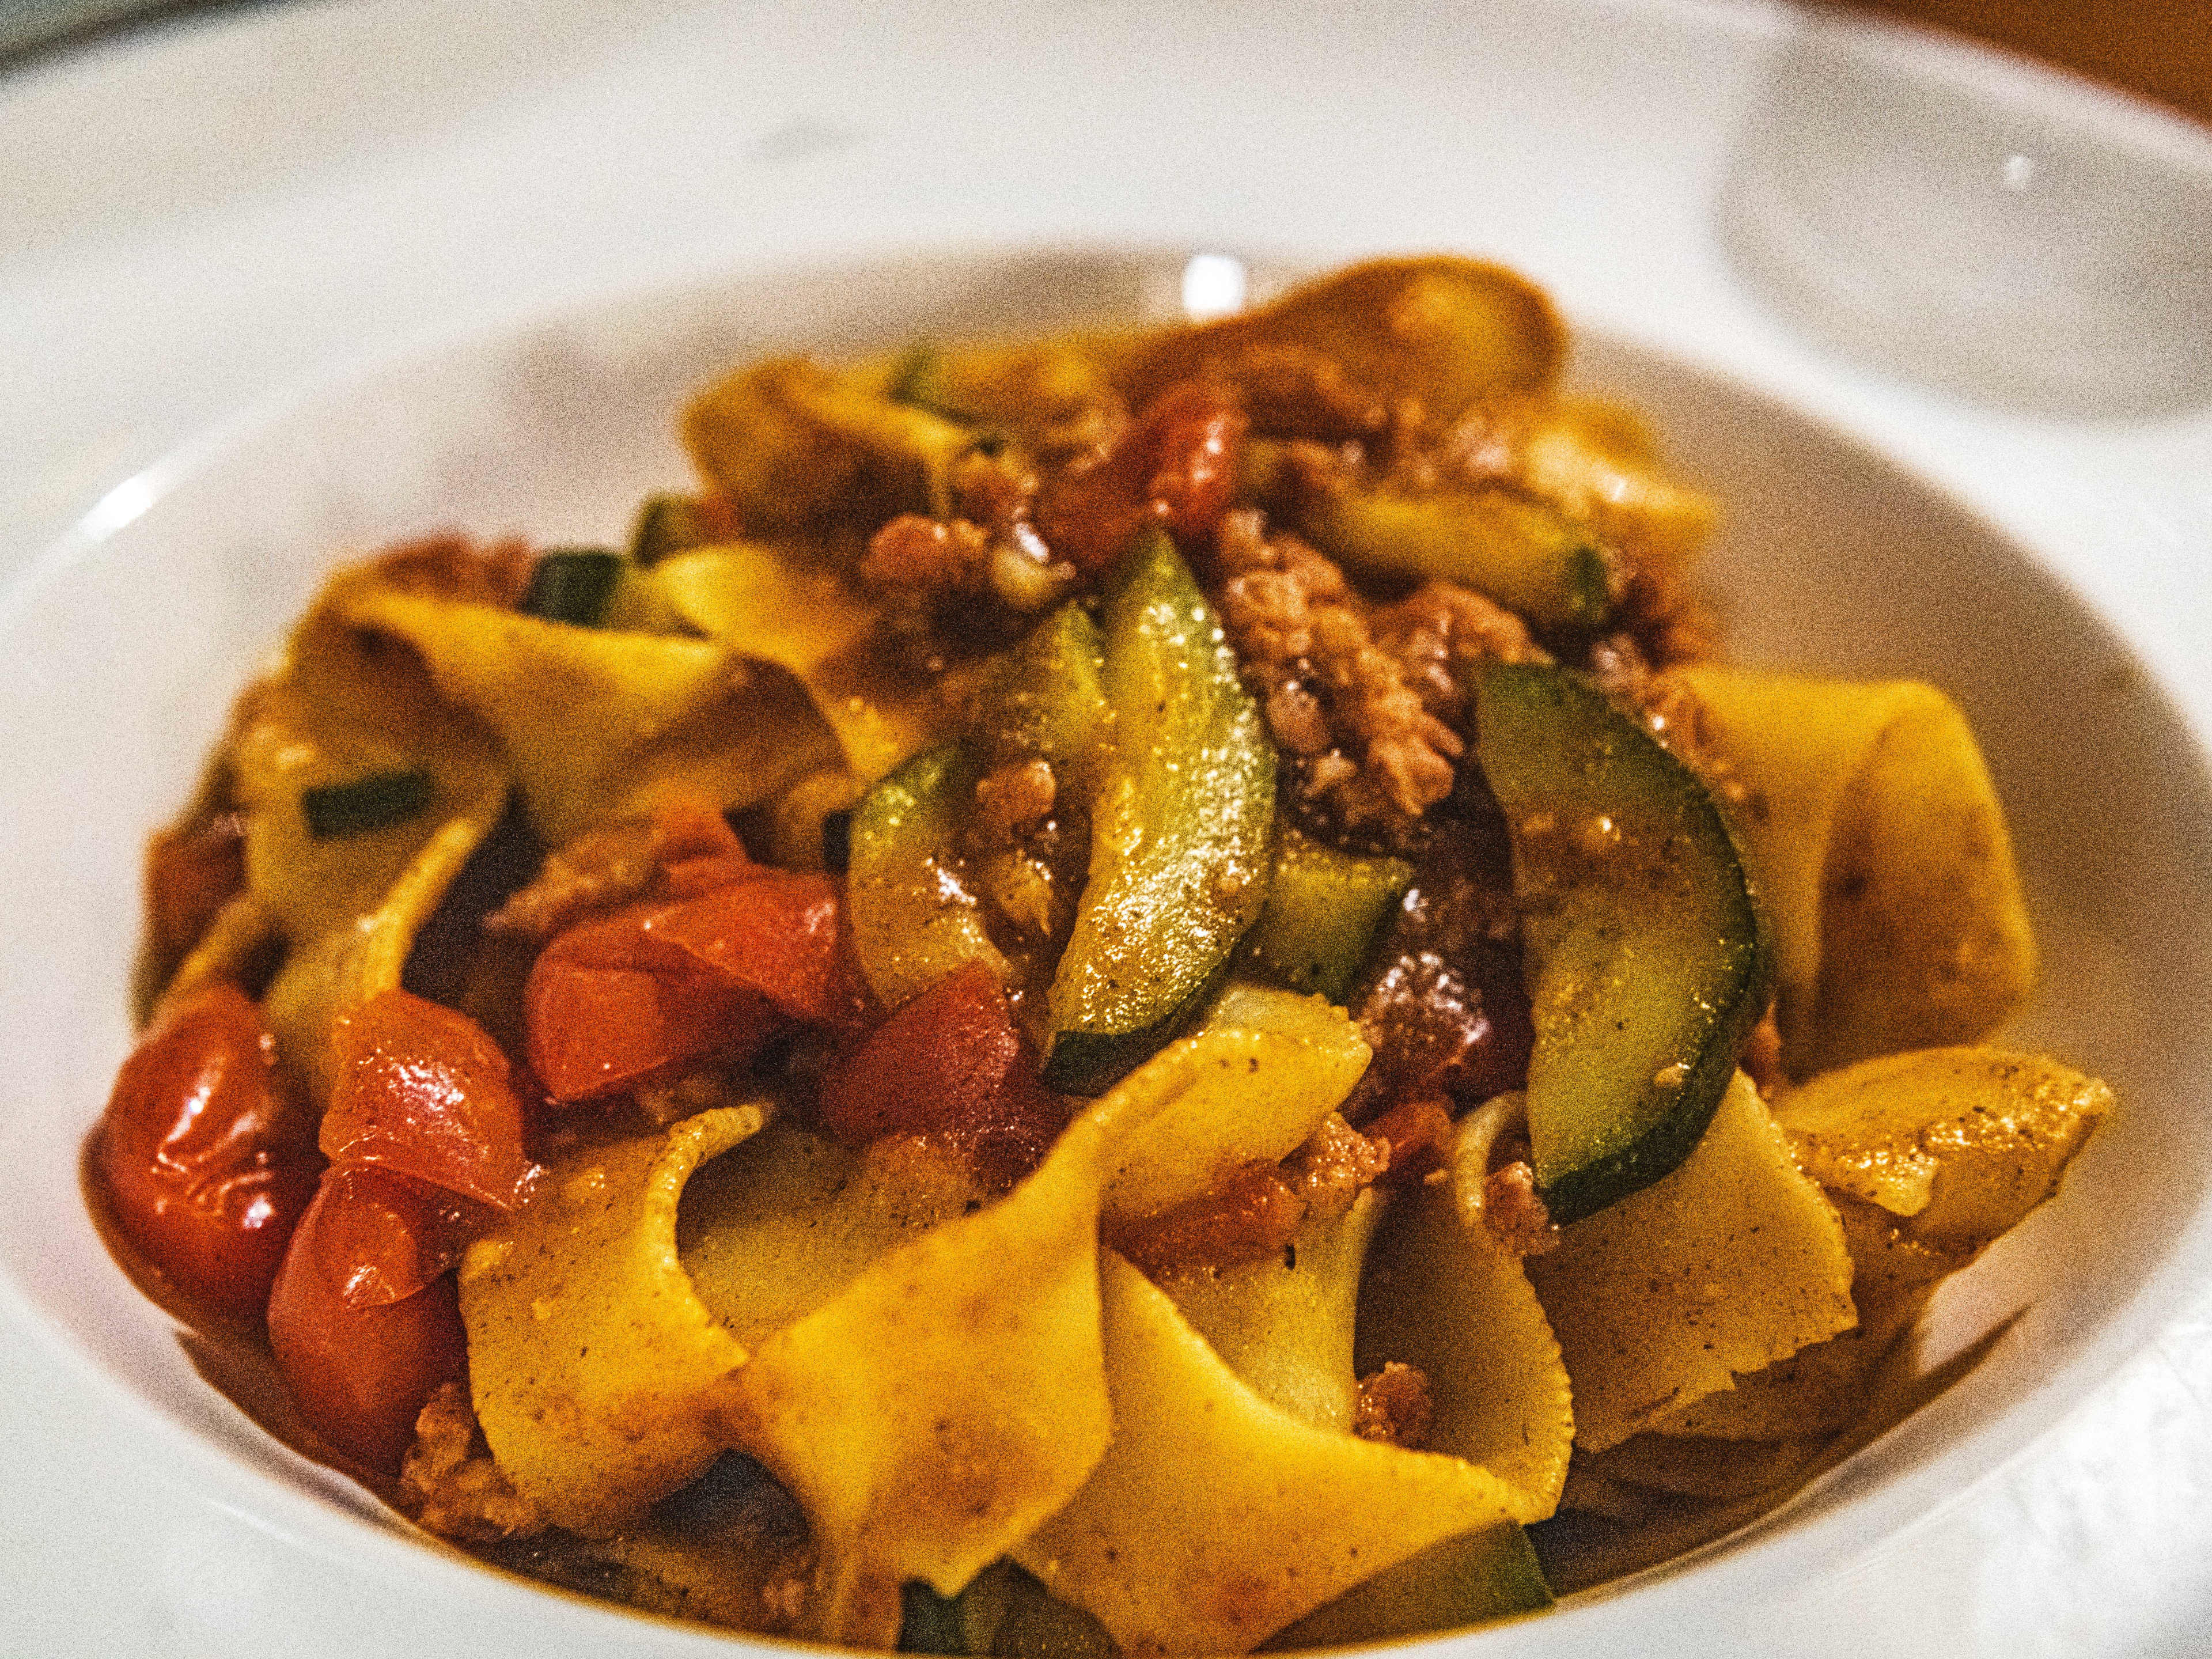 The pappardelle fatte in casa con salsicca from Pappa Roma.